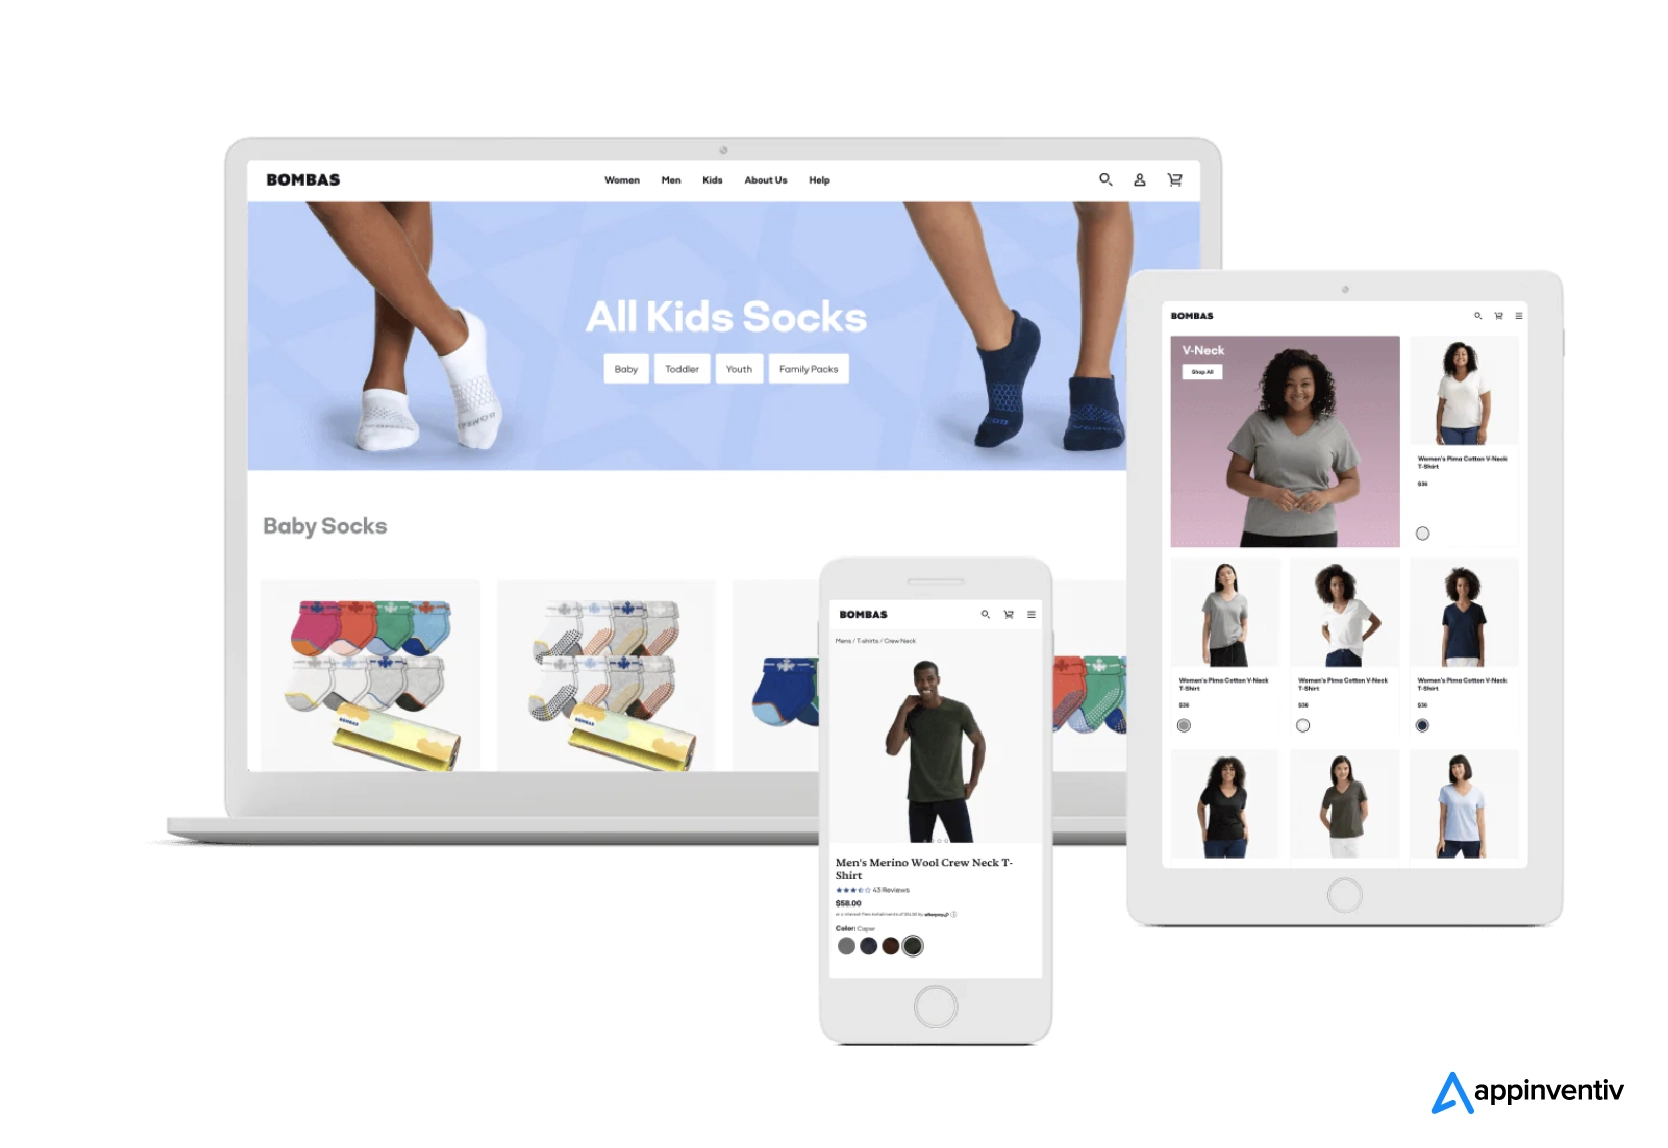  UI/UX designs for Shopify Plus stores on various screen sizes